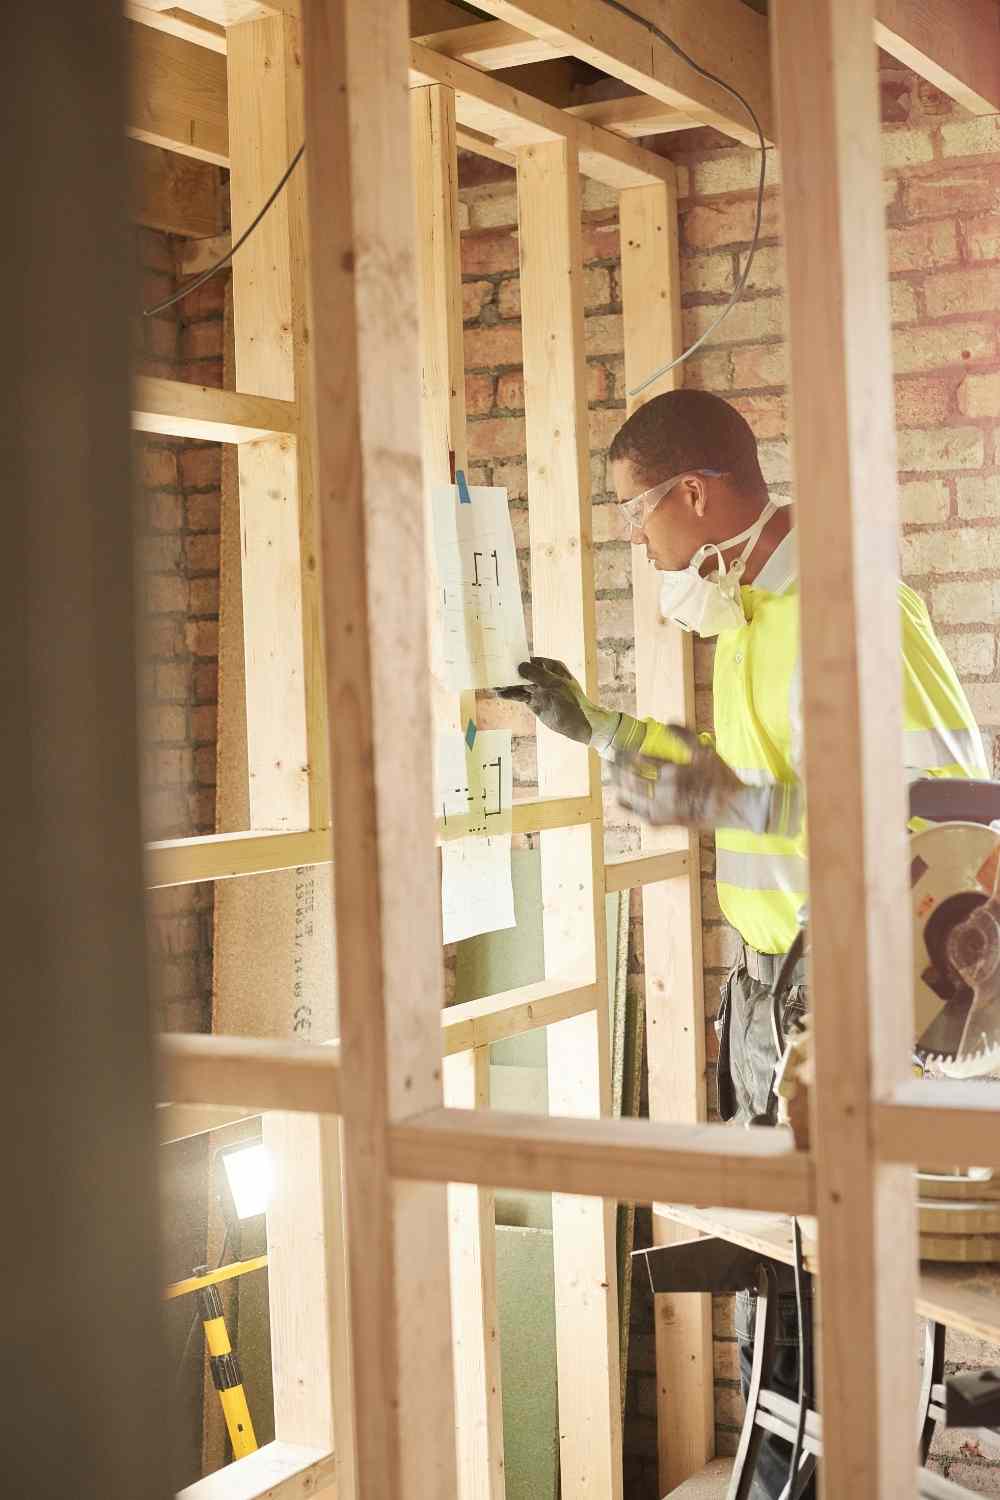 Hiring a contractor without a background check